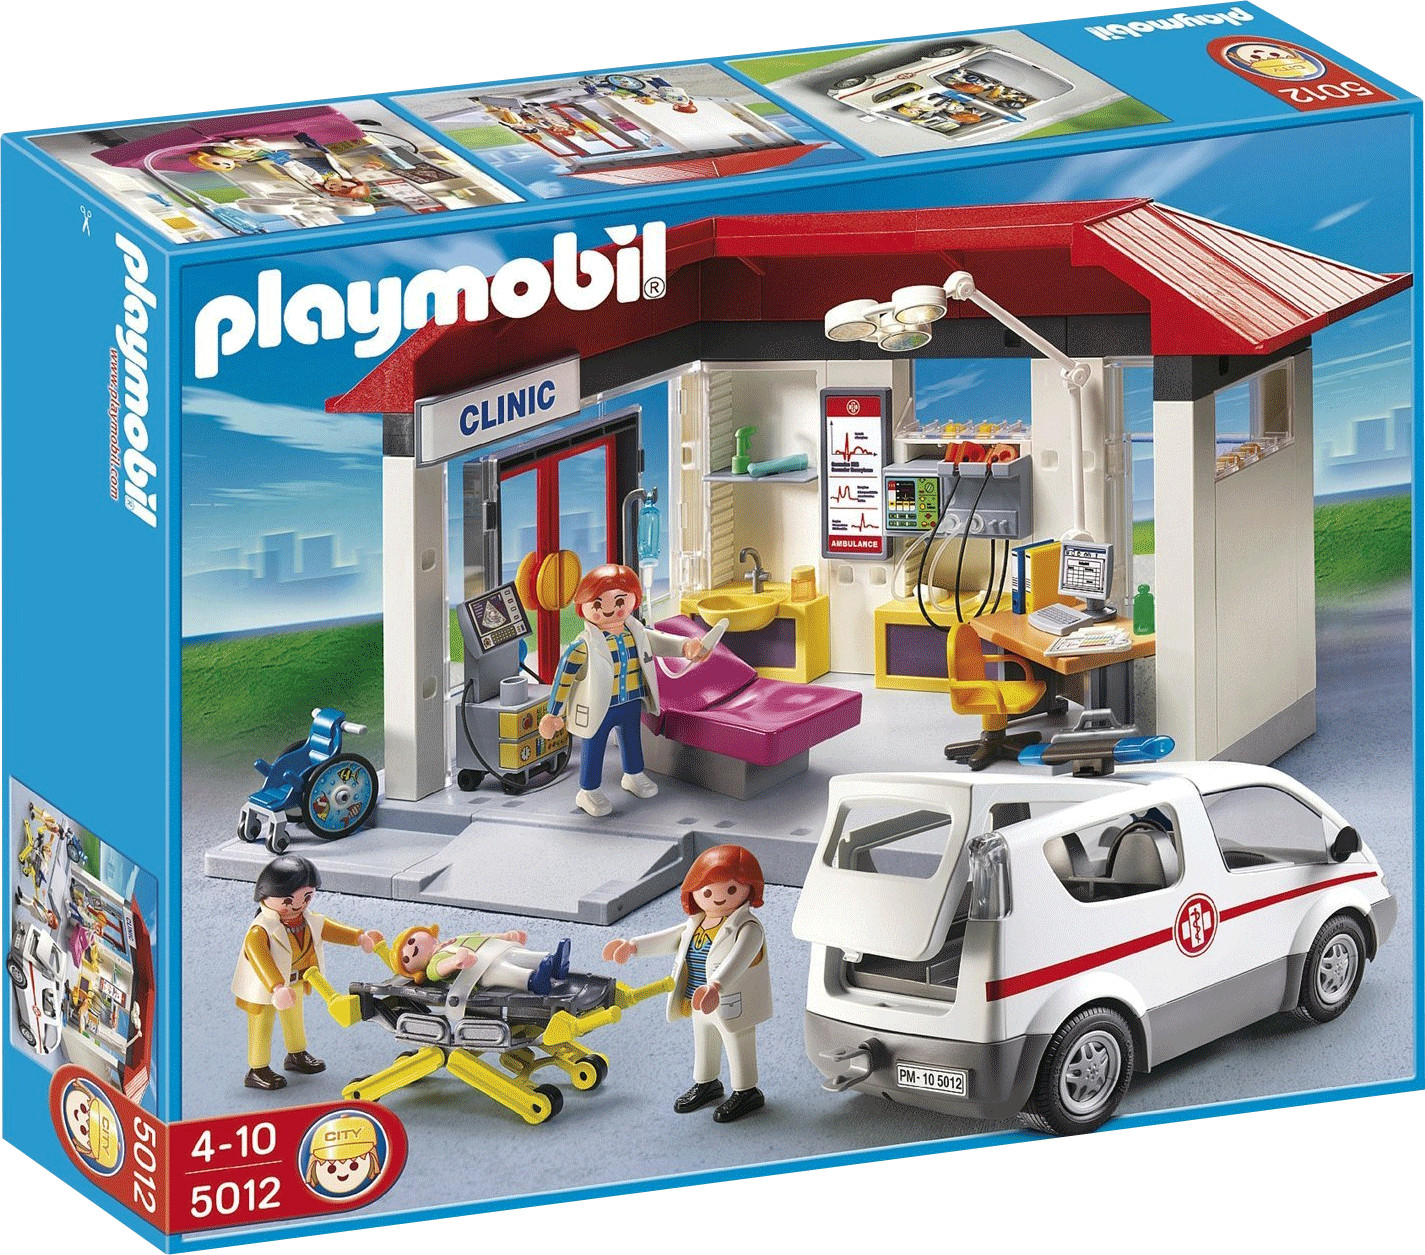 Playmobil Clinic with Emergency Vehicle (5012)